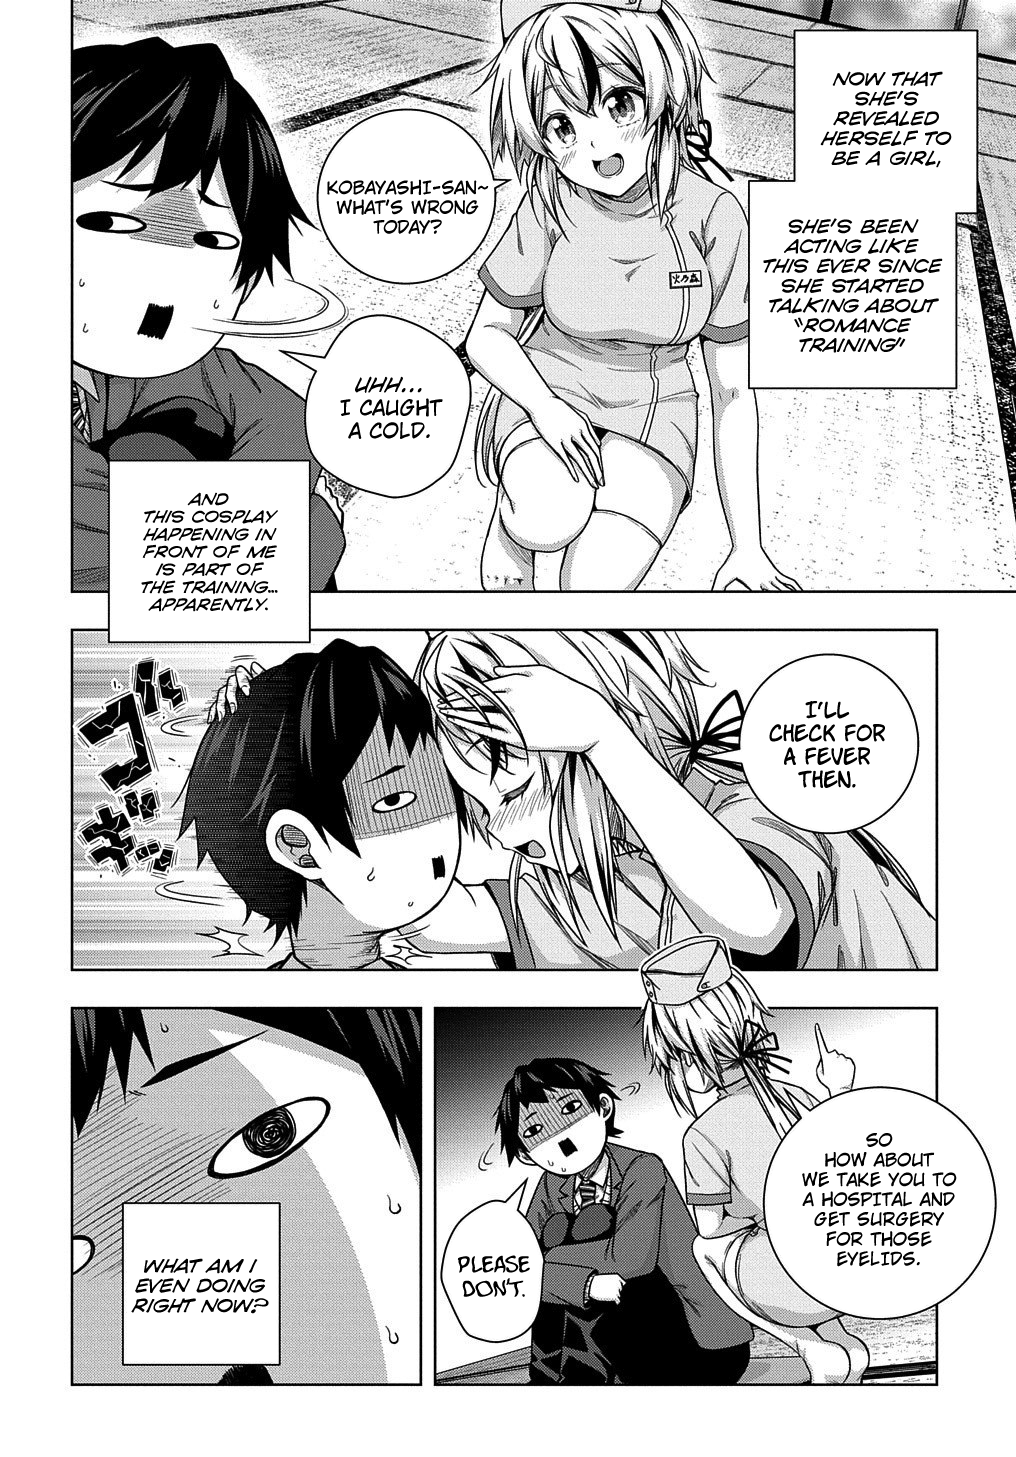 Is It Tough Being A Friend? - Page 2